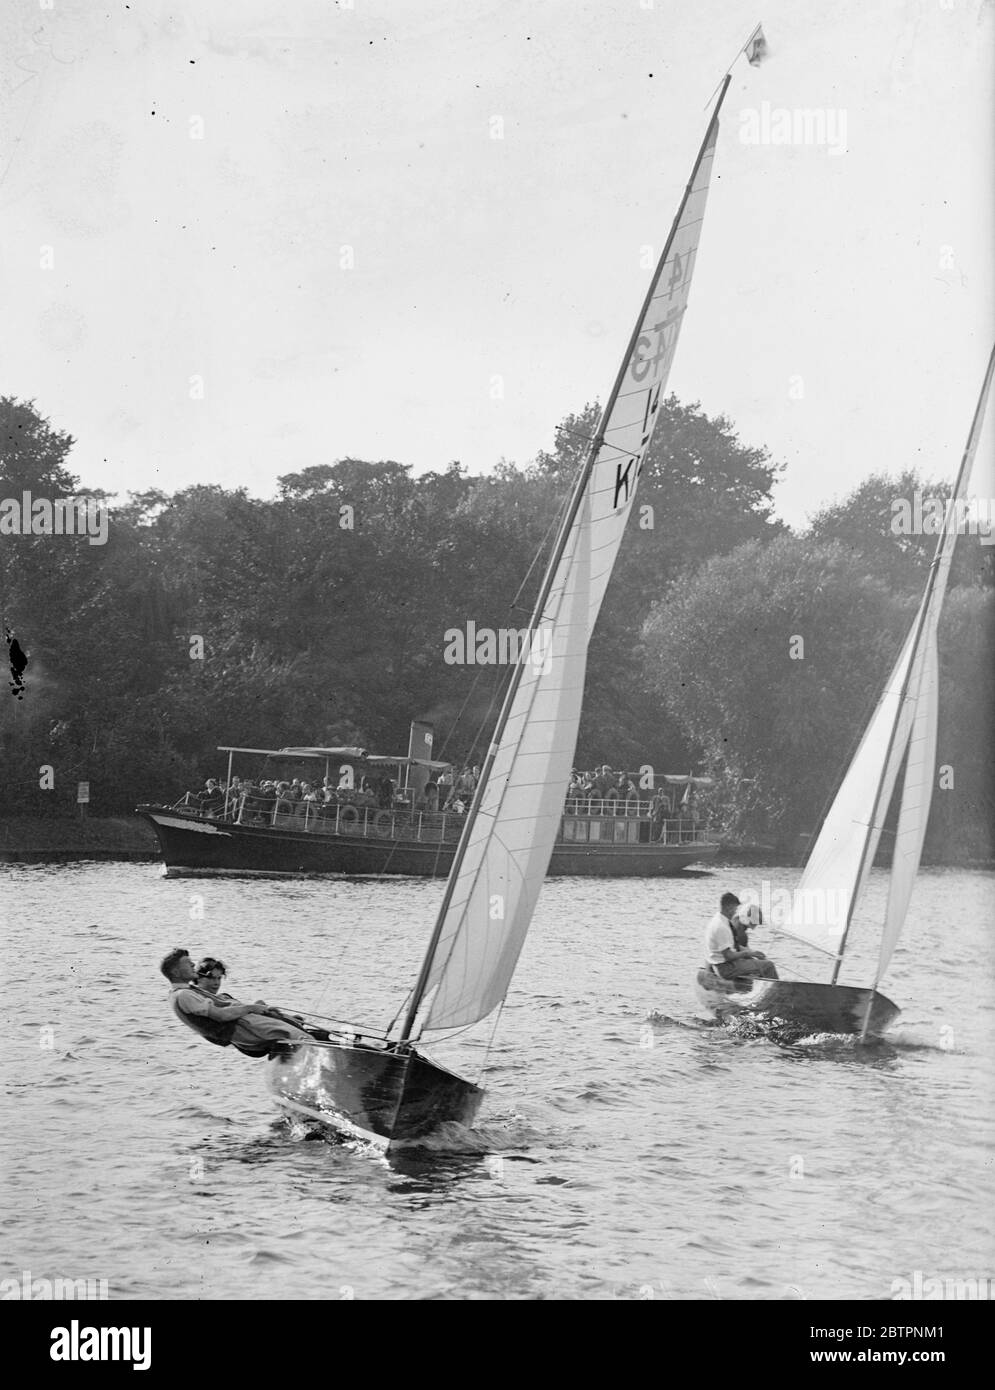 Yachting girls race in Teddington. Yachting girls, sailing, 14 feet international class craft, competed in the ladies race of the Tamesis Club races on the Thames at Teddington today (Sunday). Photo shows, a yacht healing over during the ladies race. In the background. A river steamer can be seen passing the race. 26 September 1937 Stock Photo